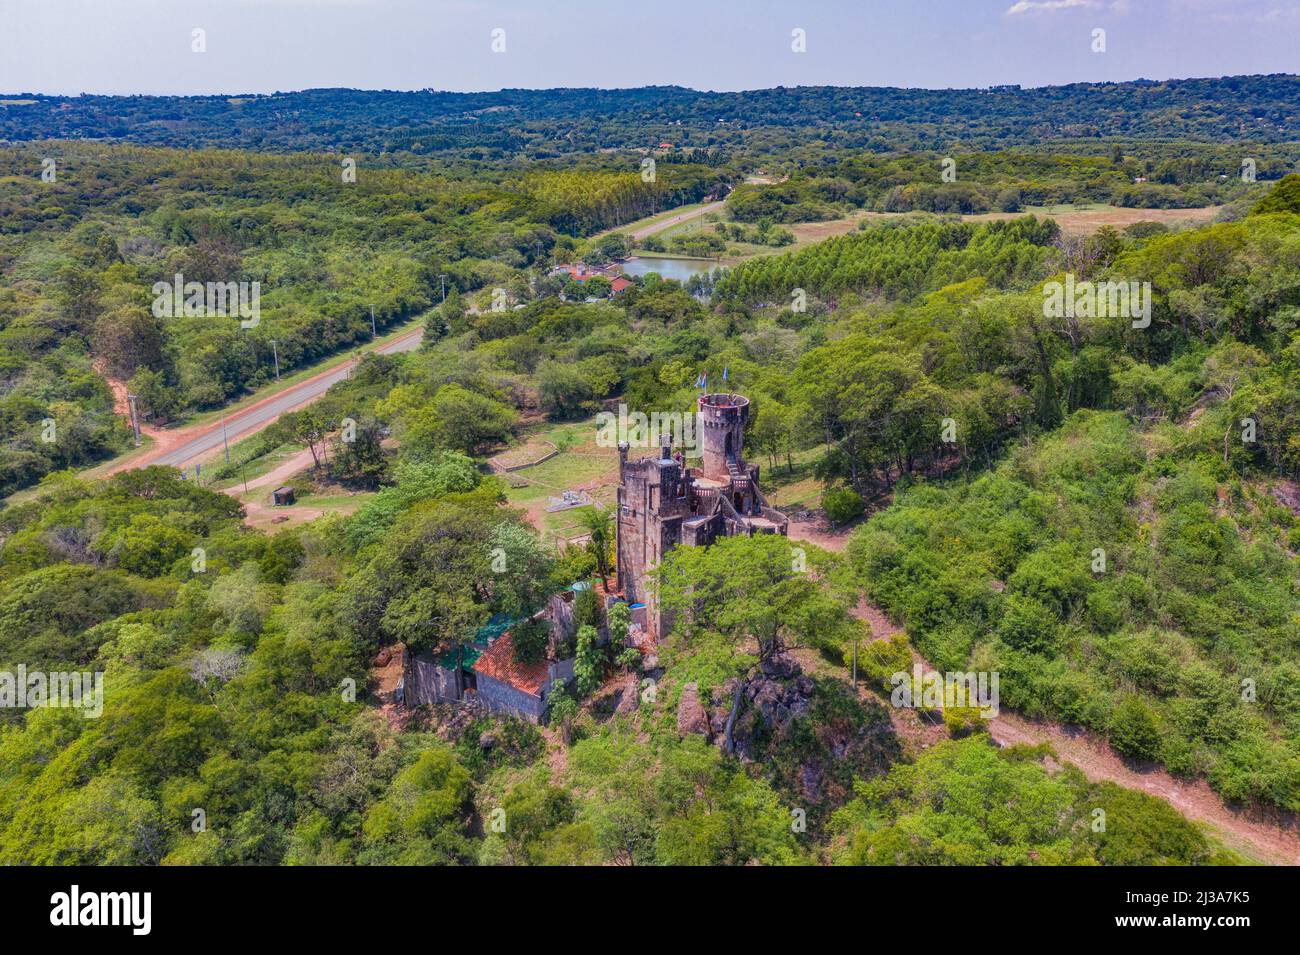 Colonia Independencia, Paraguay - February 13, 2022: Aerial view of Castillo Echauri. The castle was built by Paraguayan architect Guillermo Echauri a Stock Photo